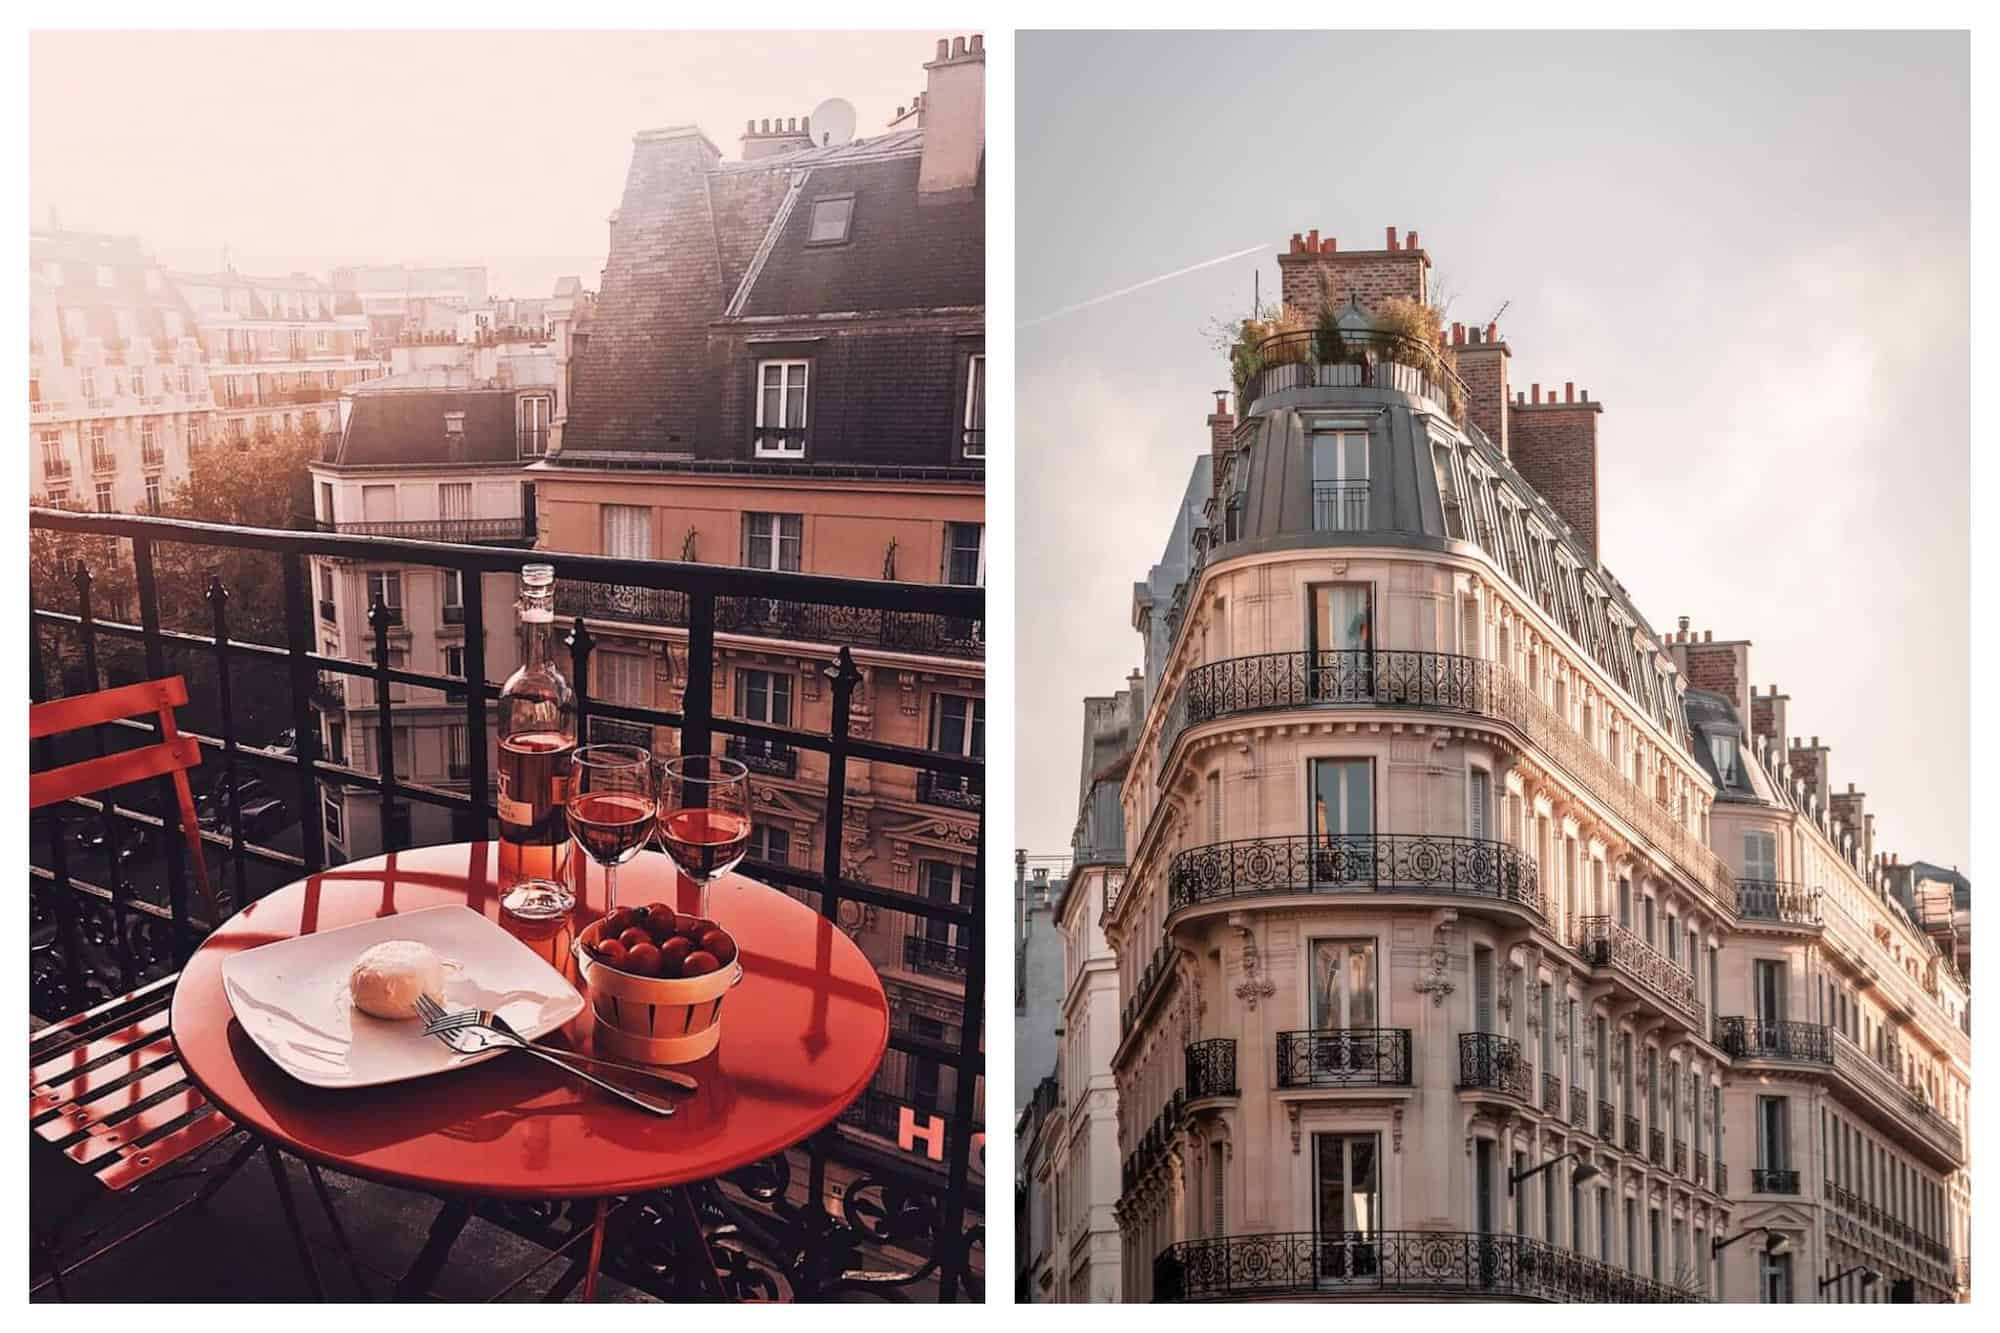 Left: a balcony in Paris with a red table and two red chairs. There is food and rosé wine with two glasses on the table. The sun is shining and Parisian buildings can be seen in the background. Right: a Parisian building with several windows and balconies. There is a small garden visible on the roof.